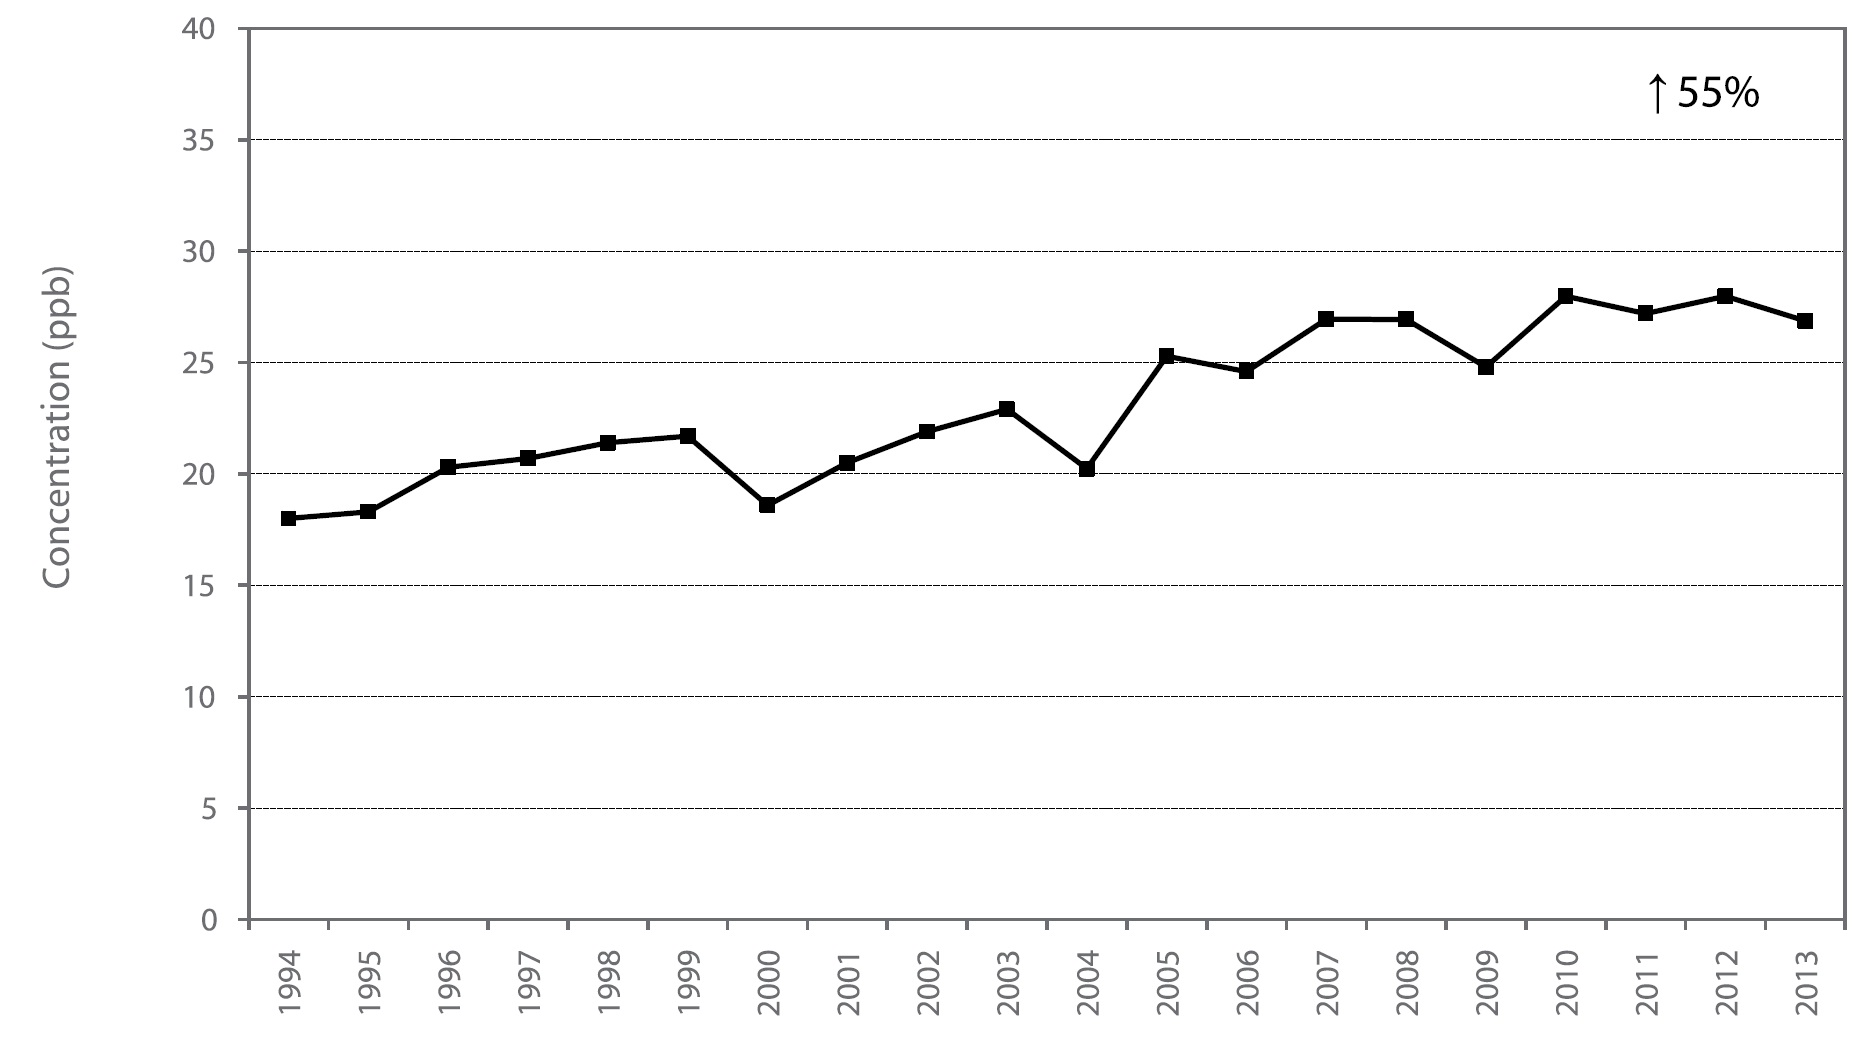 Figure A1 is a line chart displaying the ozone annual mean at Windsor Downtown from 1994 to 2013. Over this 20-year period, ozone increased 55%.